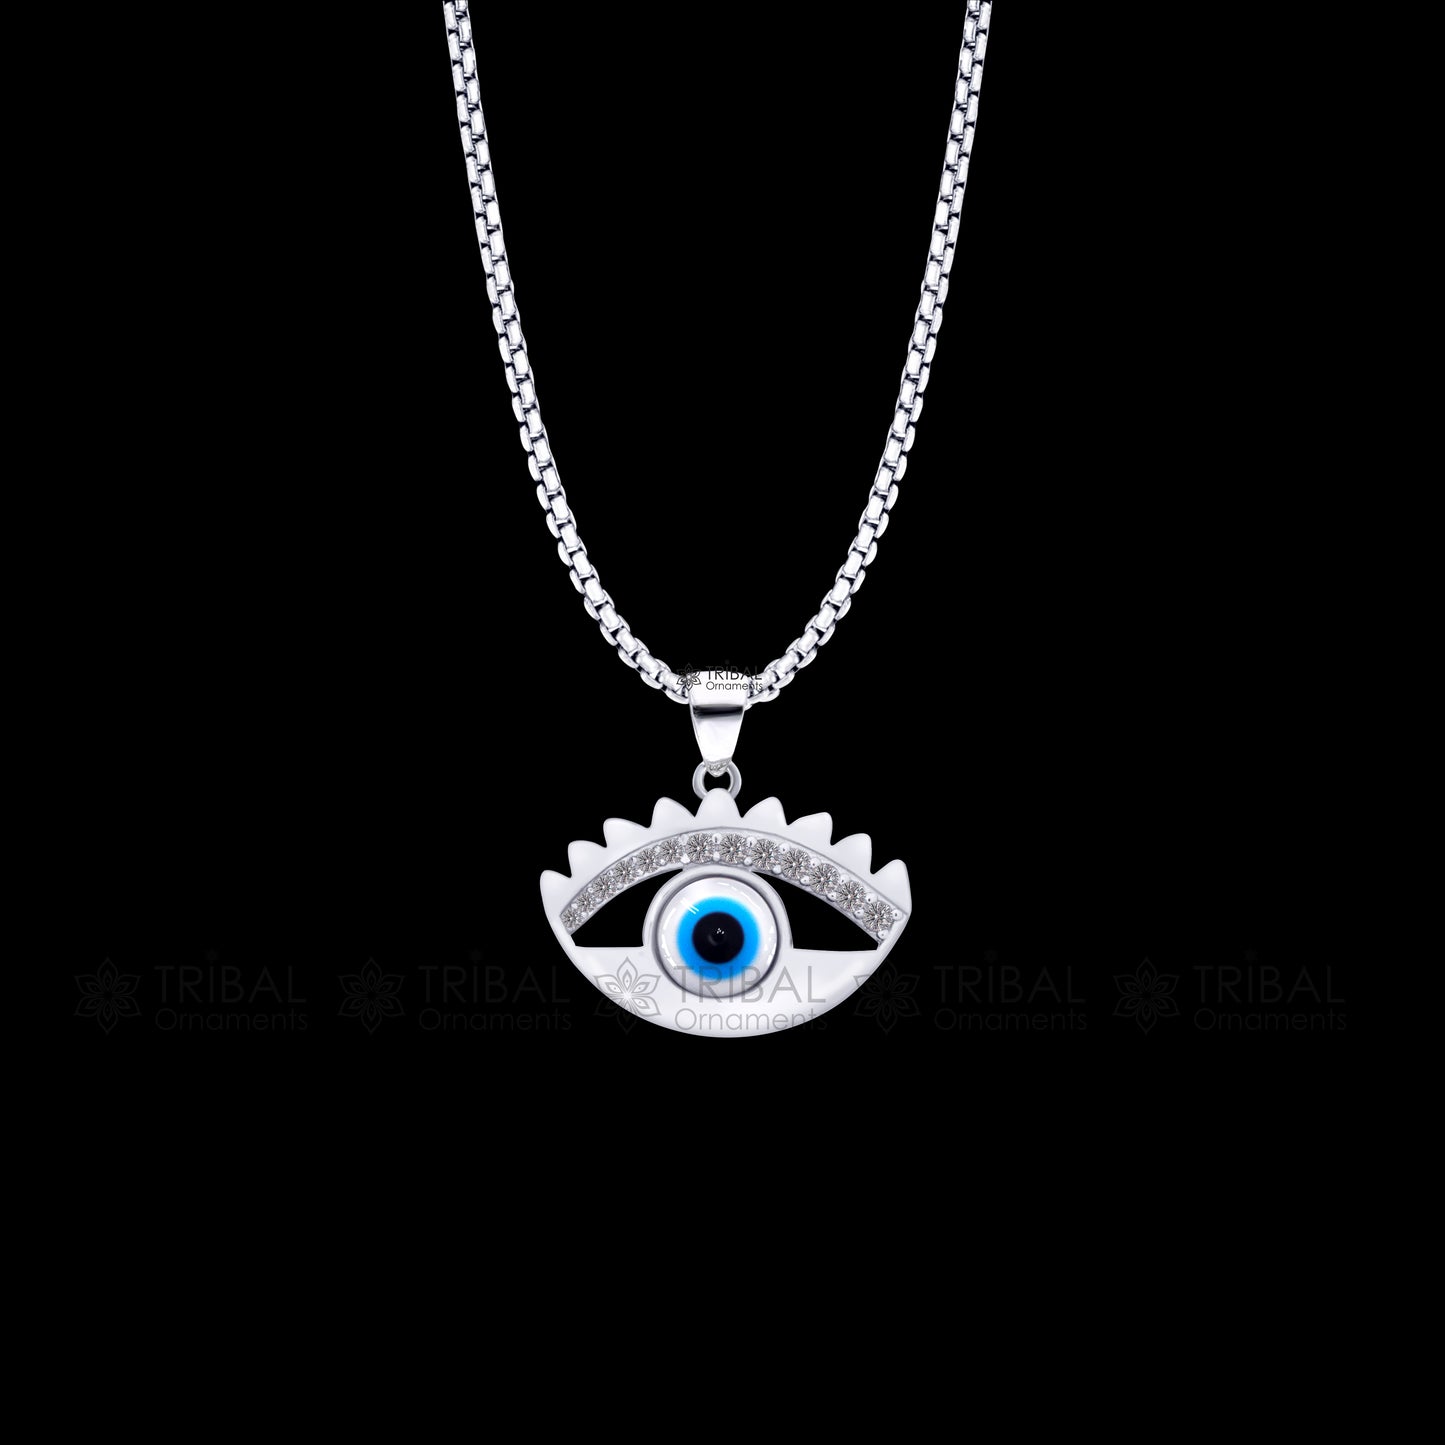 PURE 925 sterling silver evil eyes pendant with CZ stone nsp799